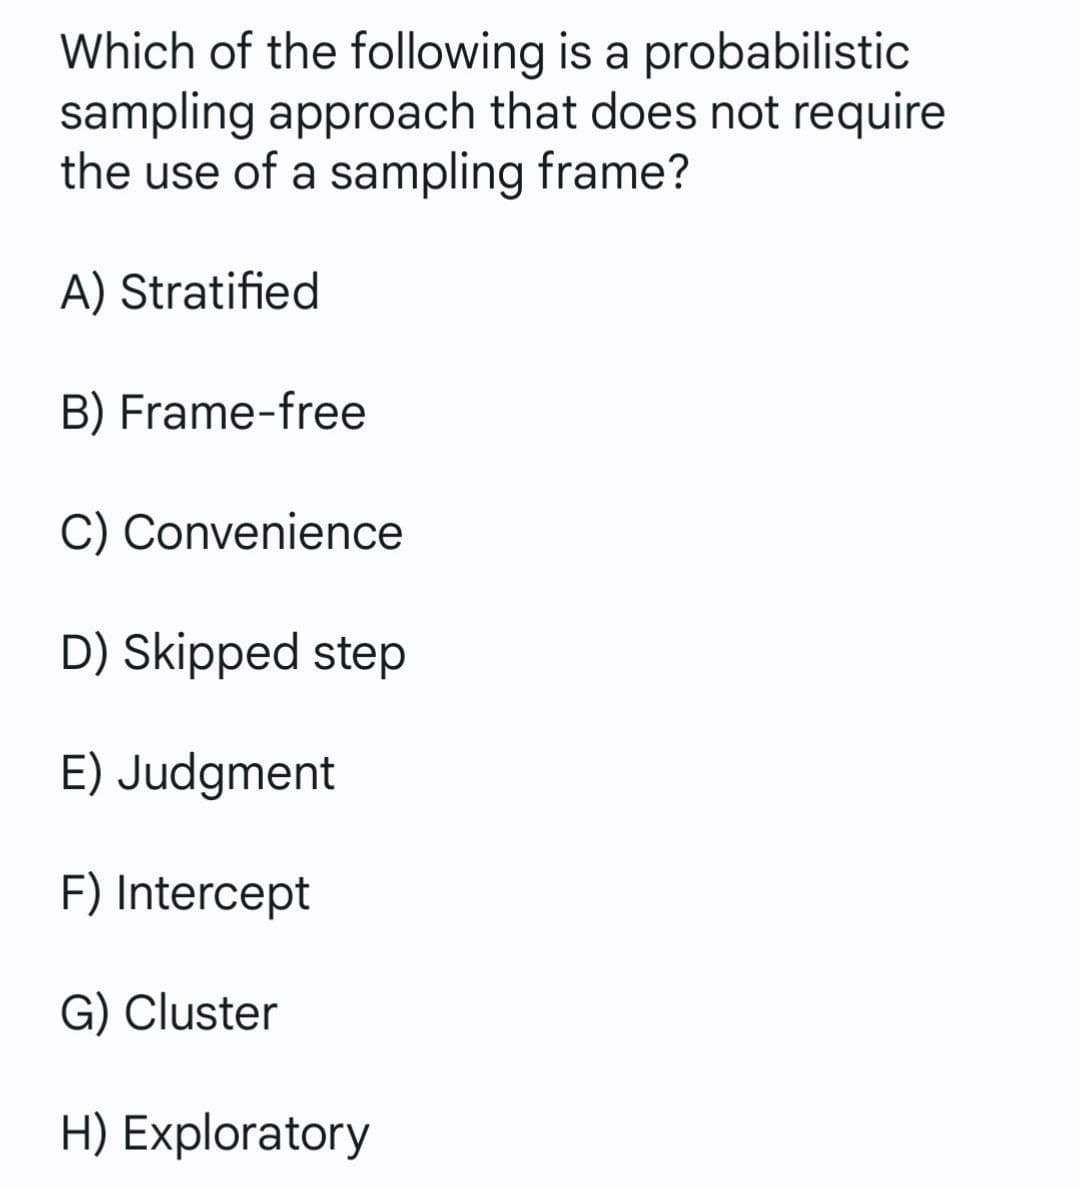 Which of the following is a probabilistic
sampling approach that does not require
the use of a sampling frame?
A) Stratified
B) Frame-free
C) Convenience
D) Skipped step
E) Judgment
F) Intercept
G) Cluster
H) Exploratory
